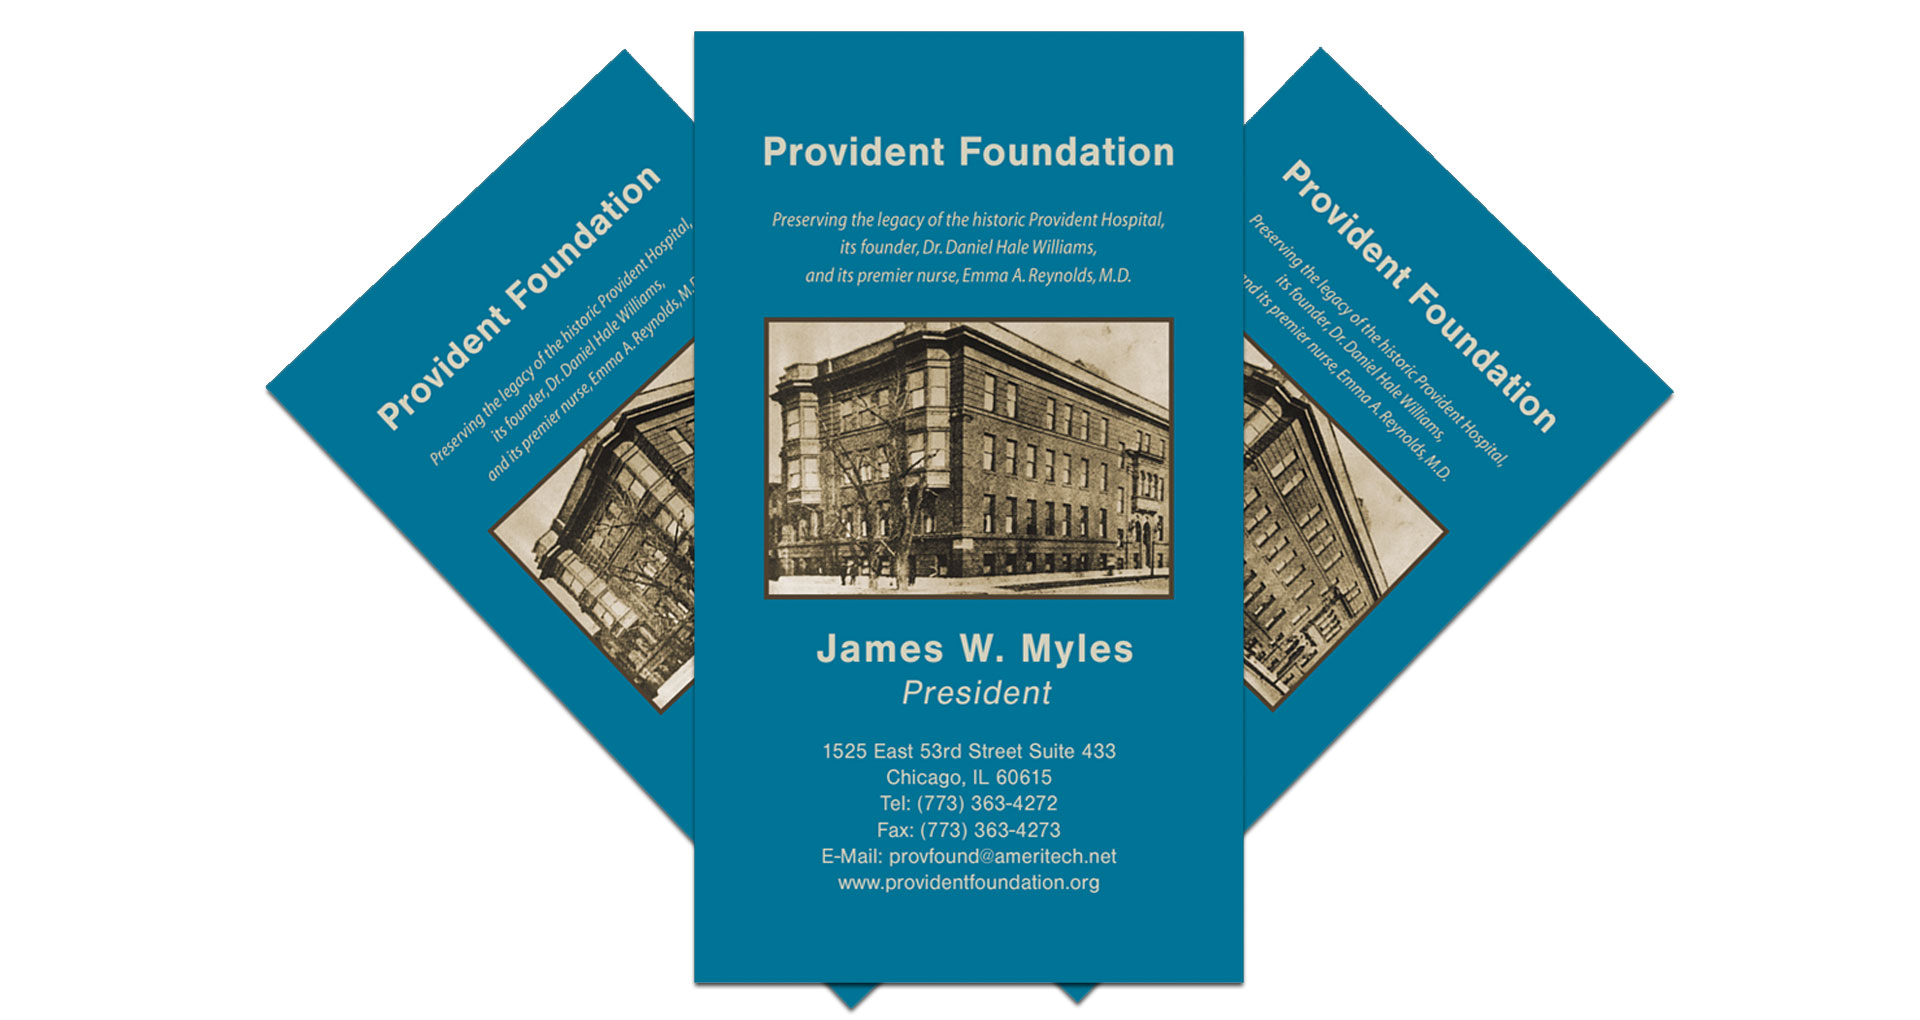 The Provident Foundation